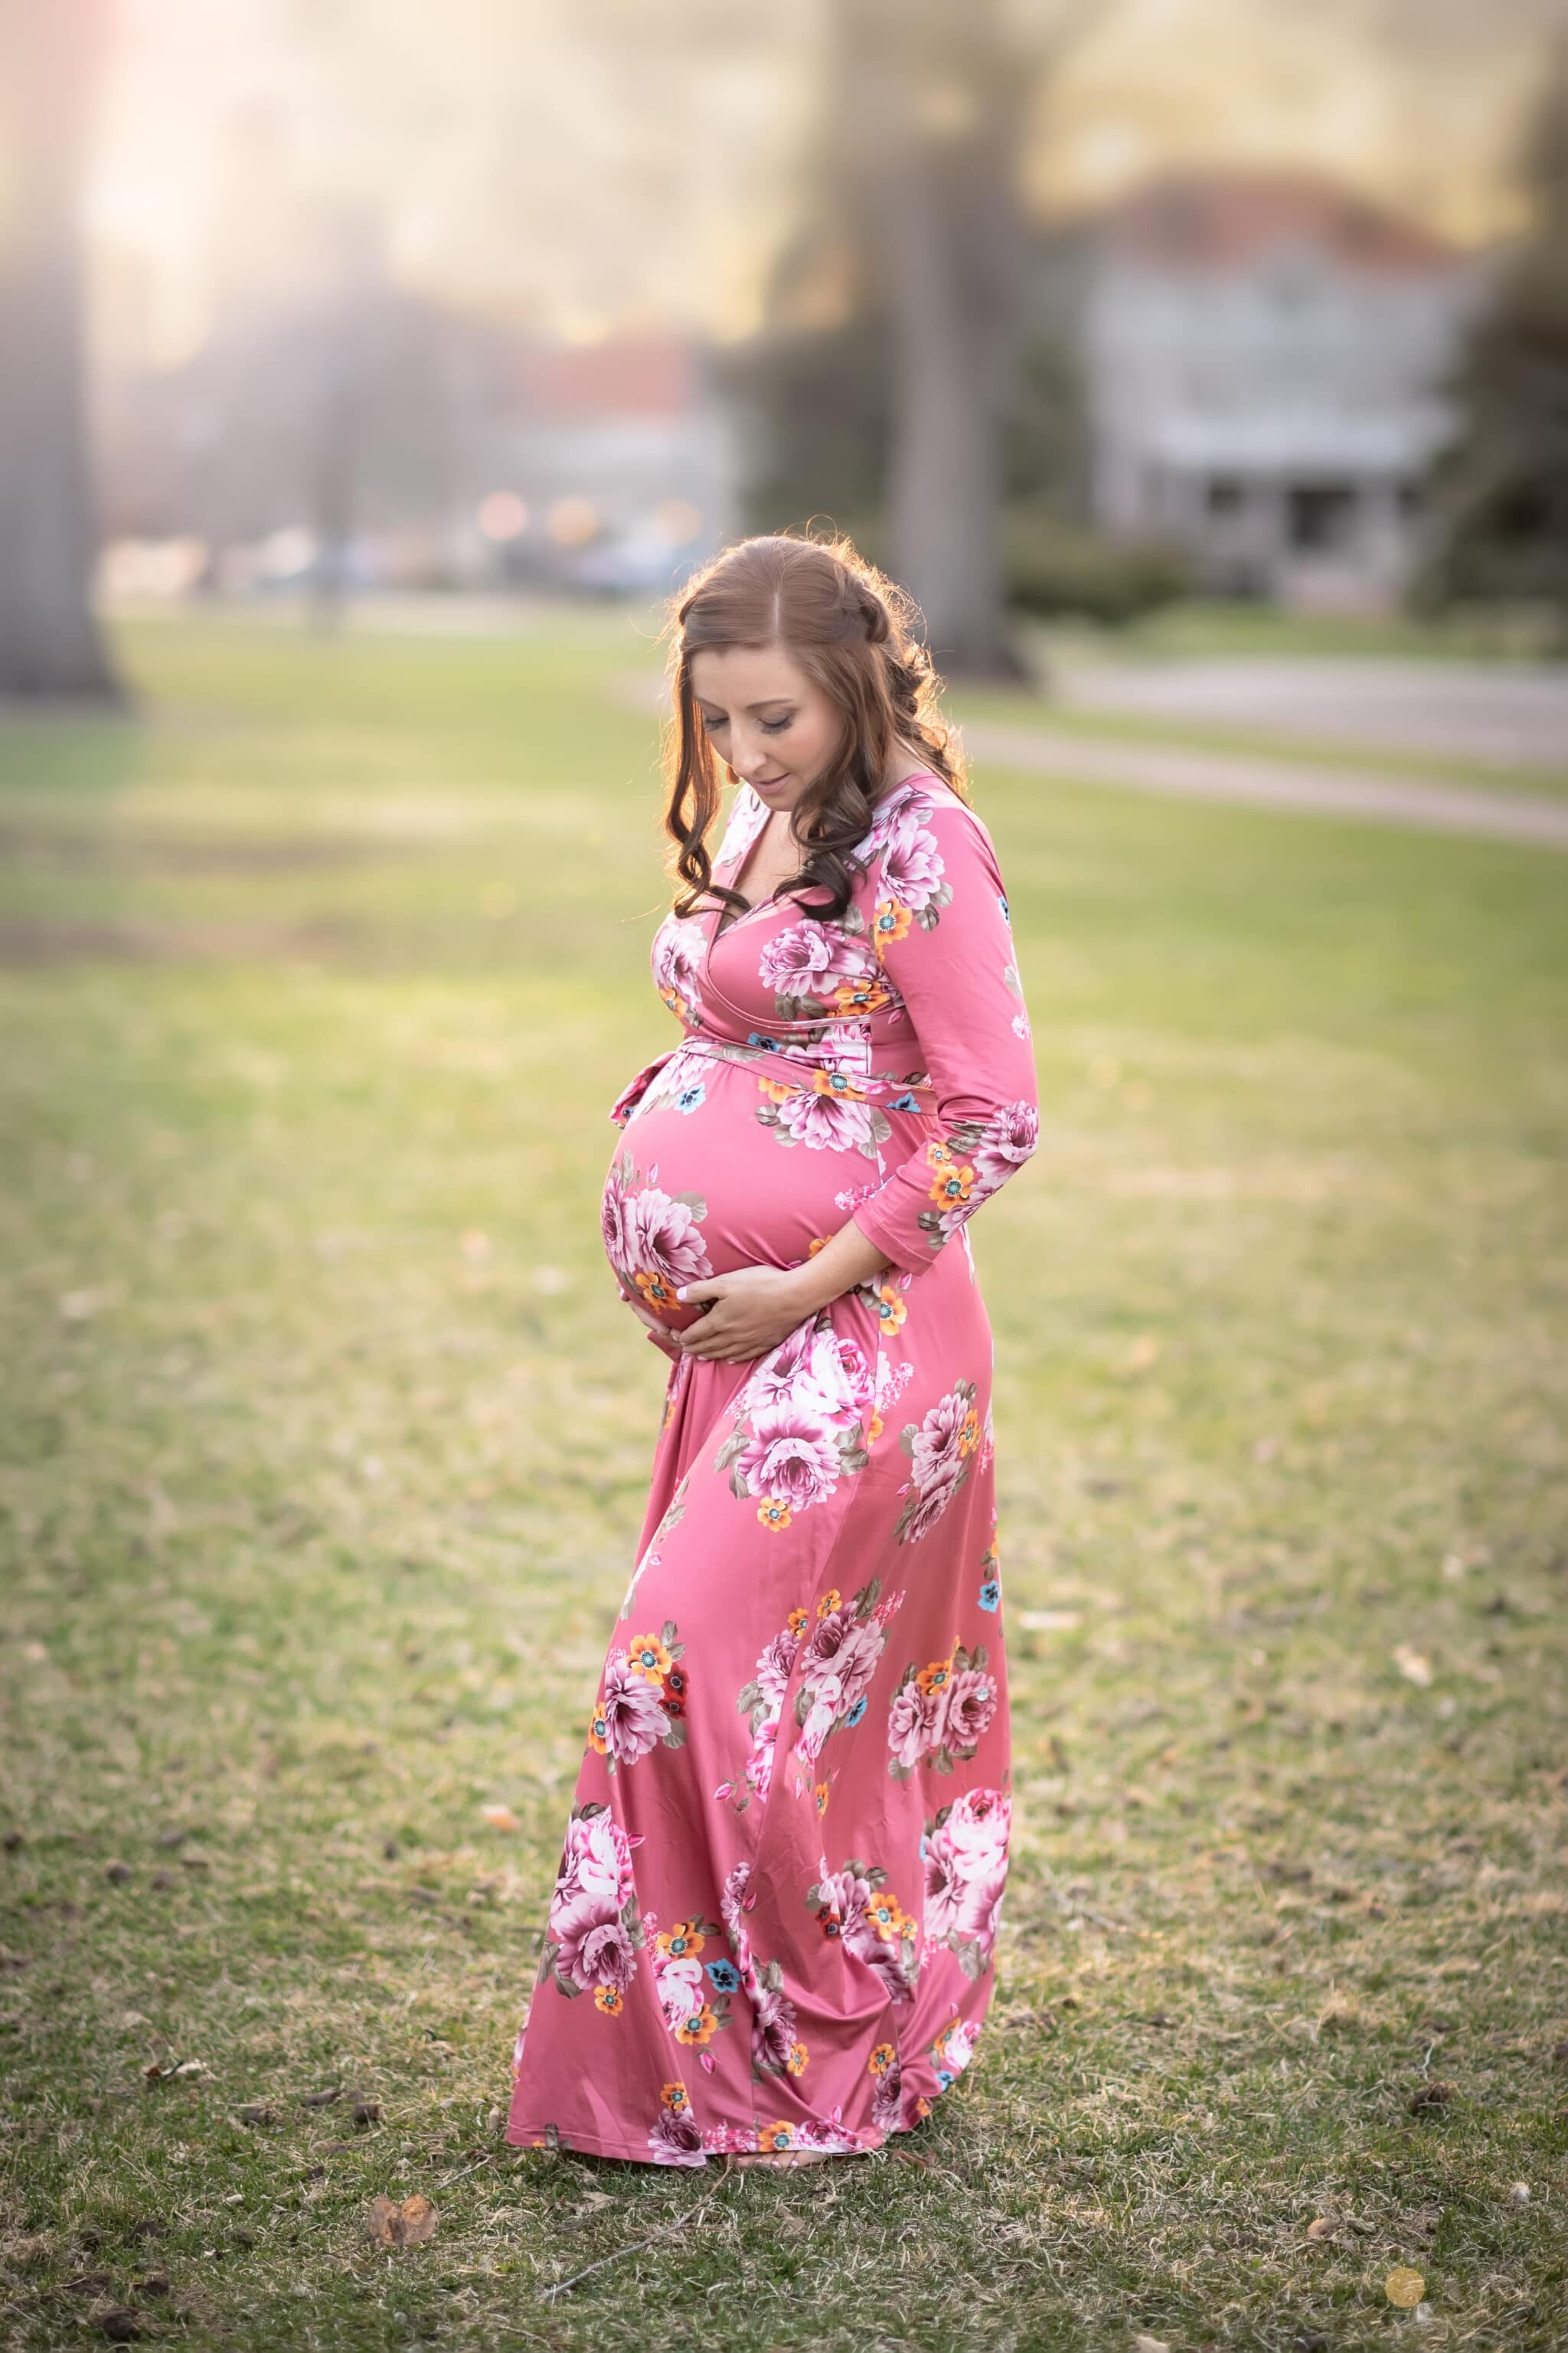 Best maternity photo sessions take place in the outdoors like this session at City Park where the mother gently holds her rounded belly.